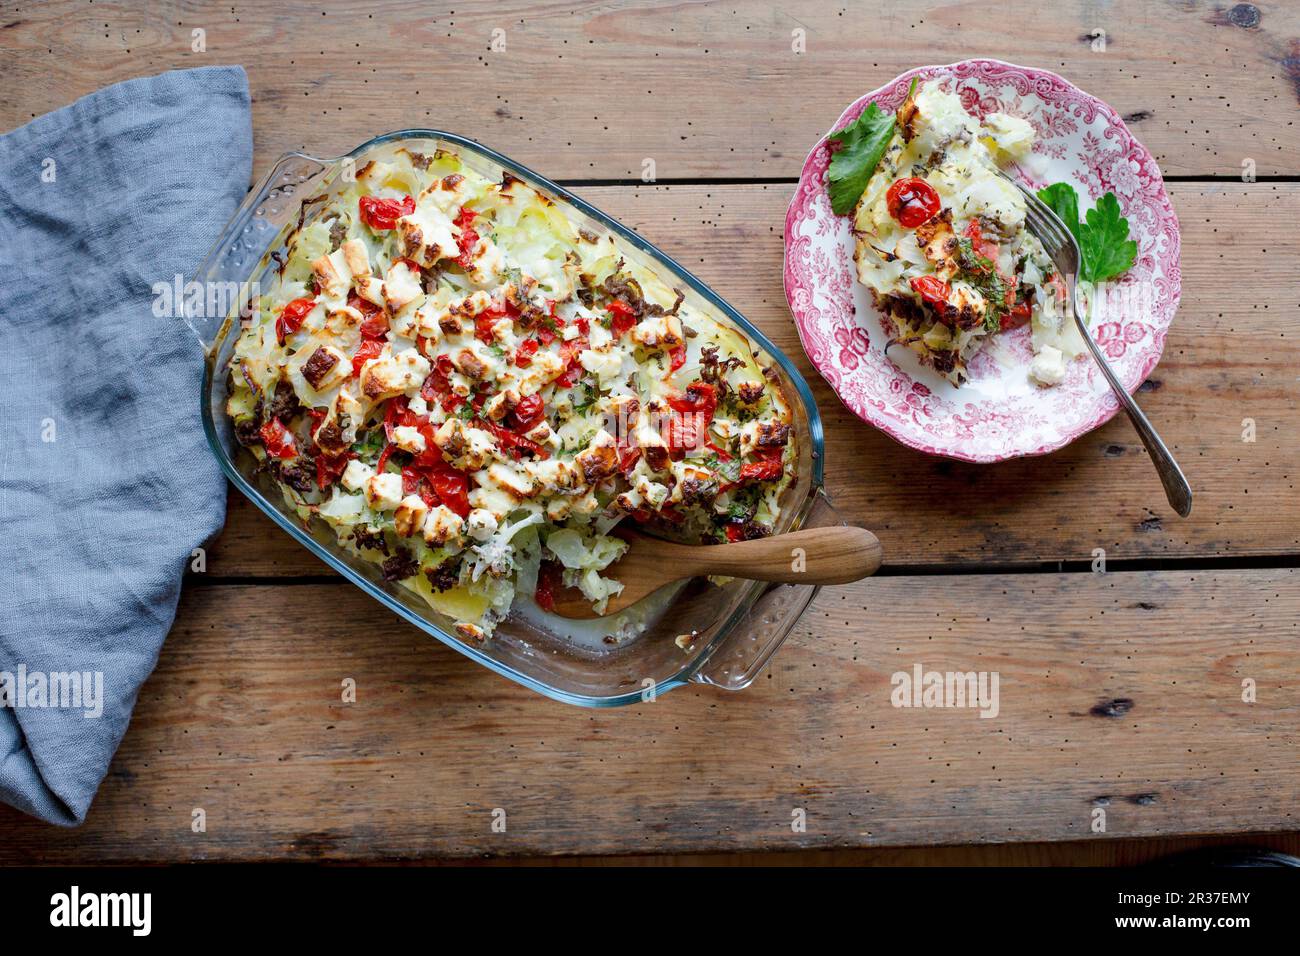 Pointed cabbage bake with chilli peppers Stock Photo